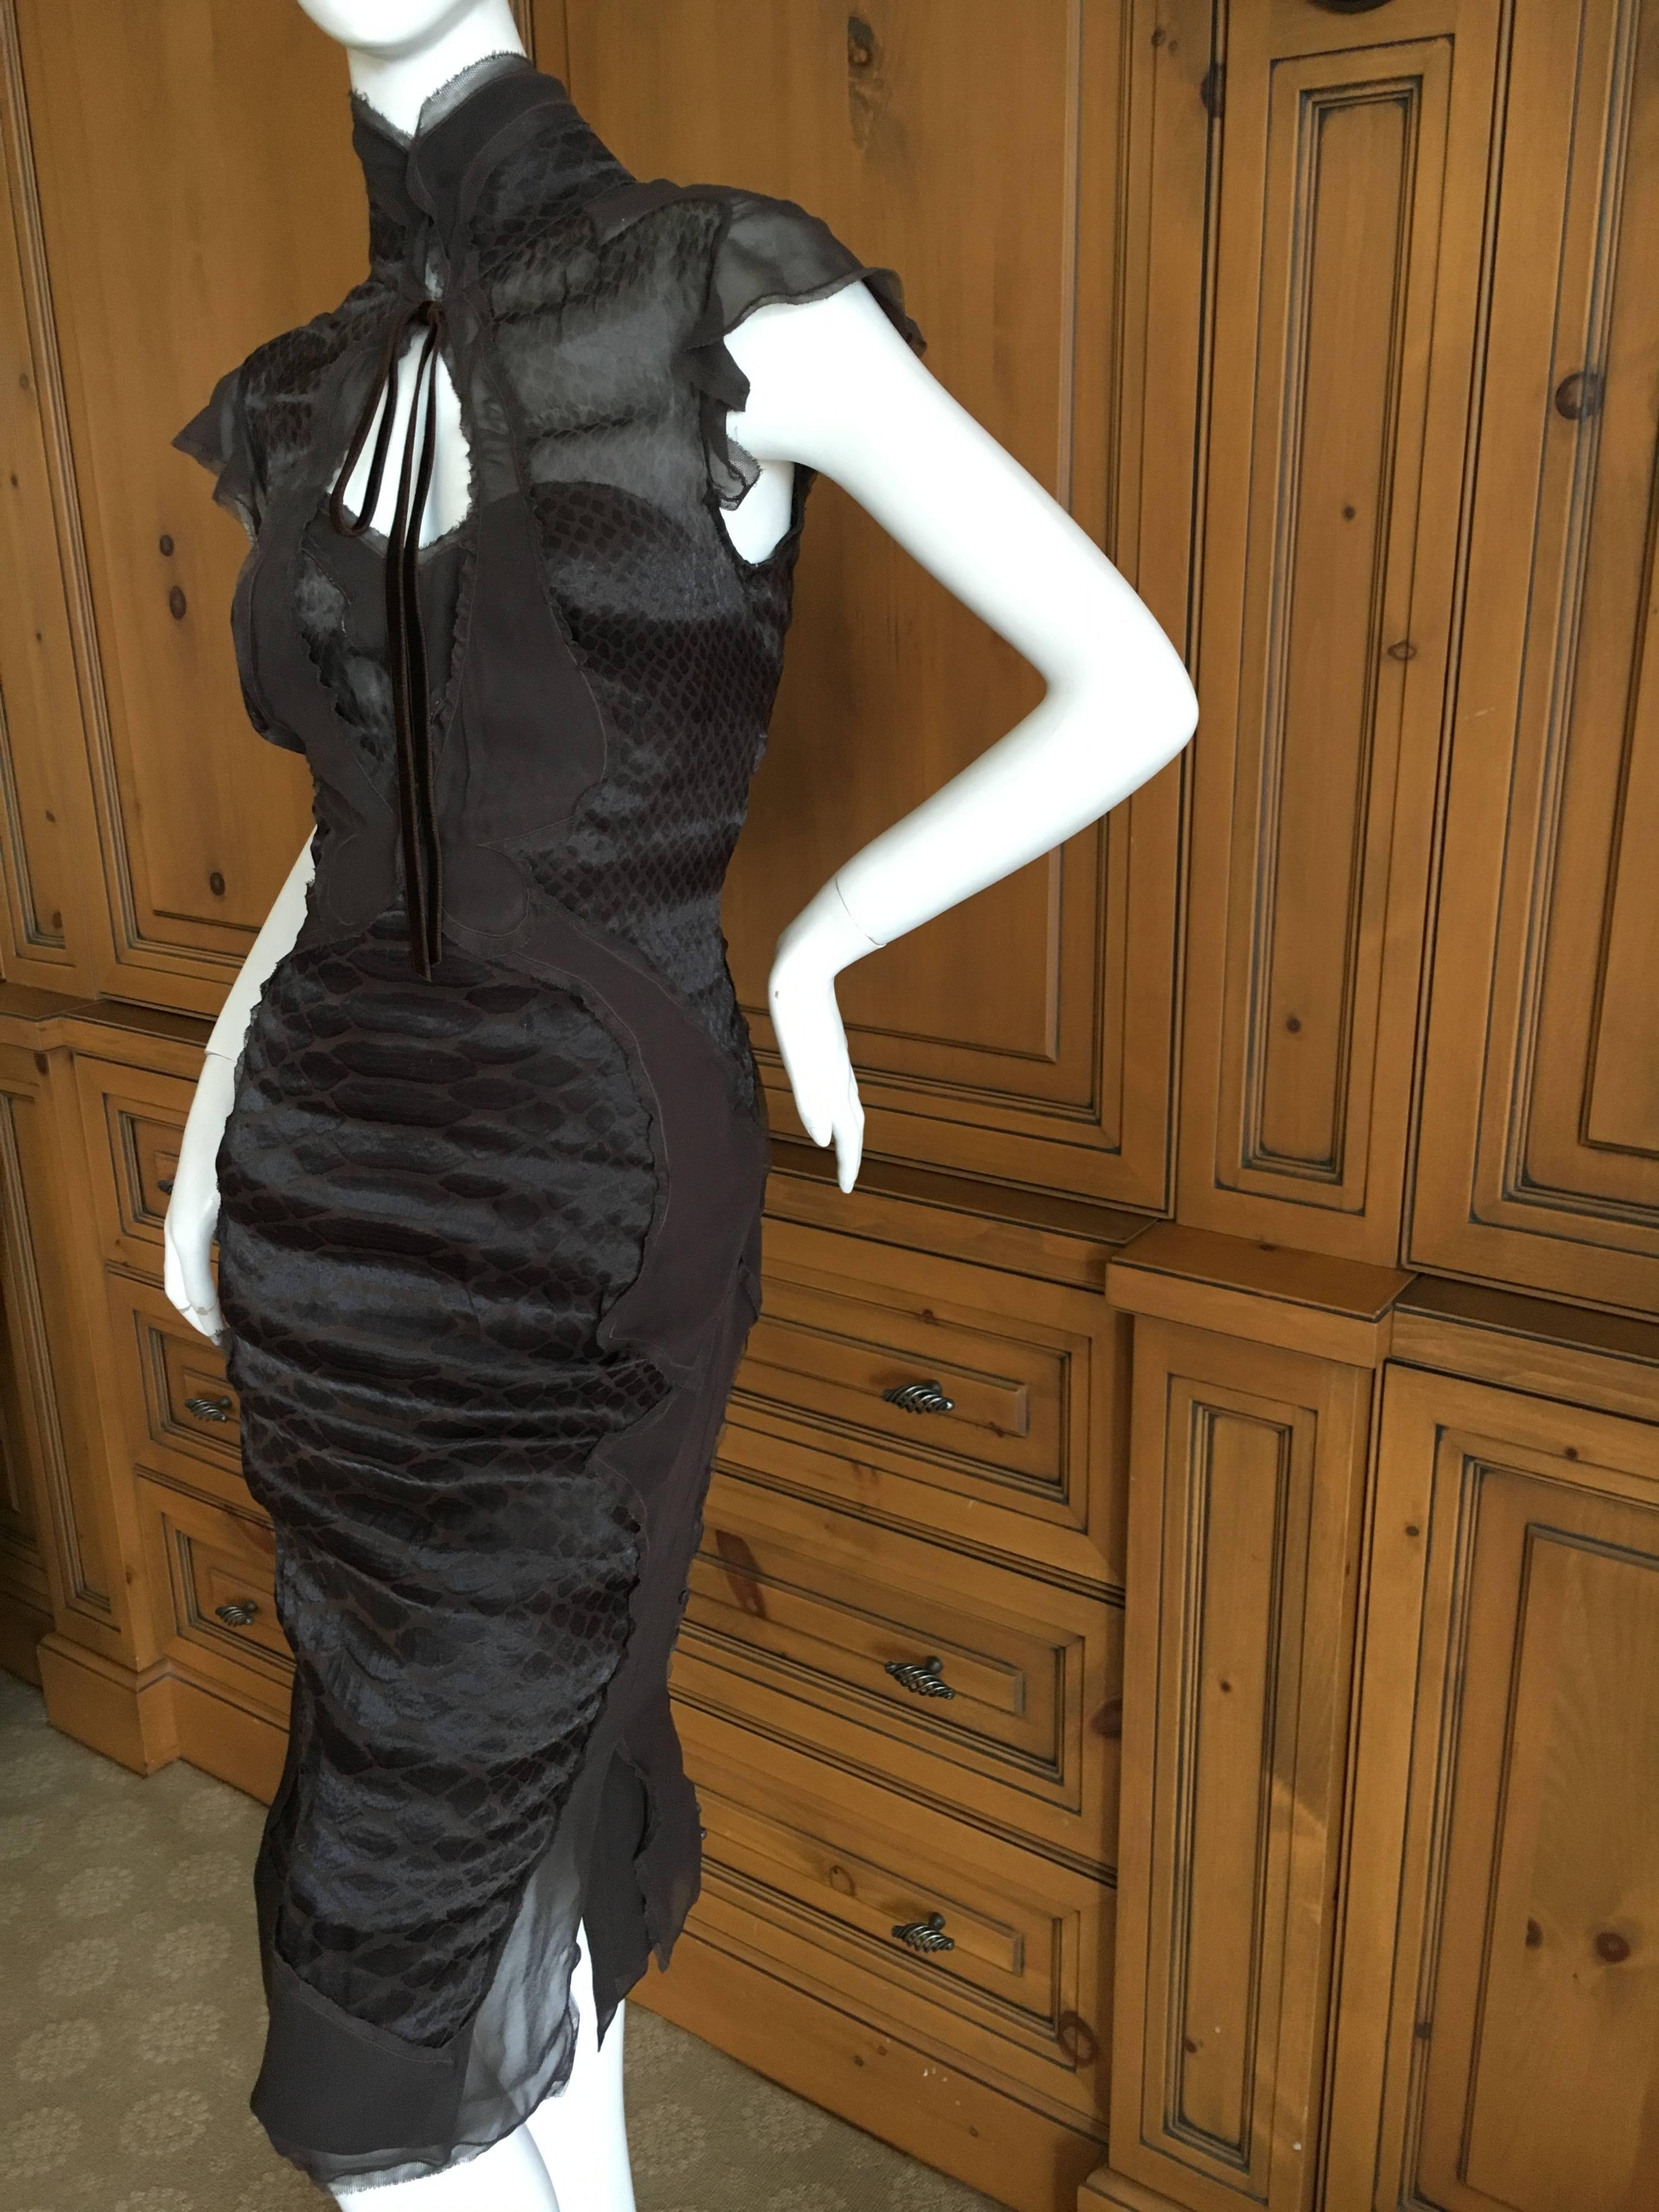 Yves Saint Laurent by Tom Ford Sheer Reptile Print Dress & Slip In Excellent Condition For Sale In Cloverdale, CA